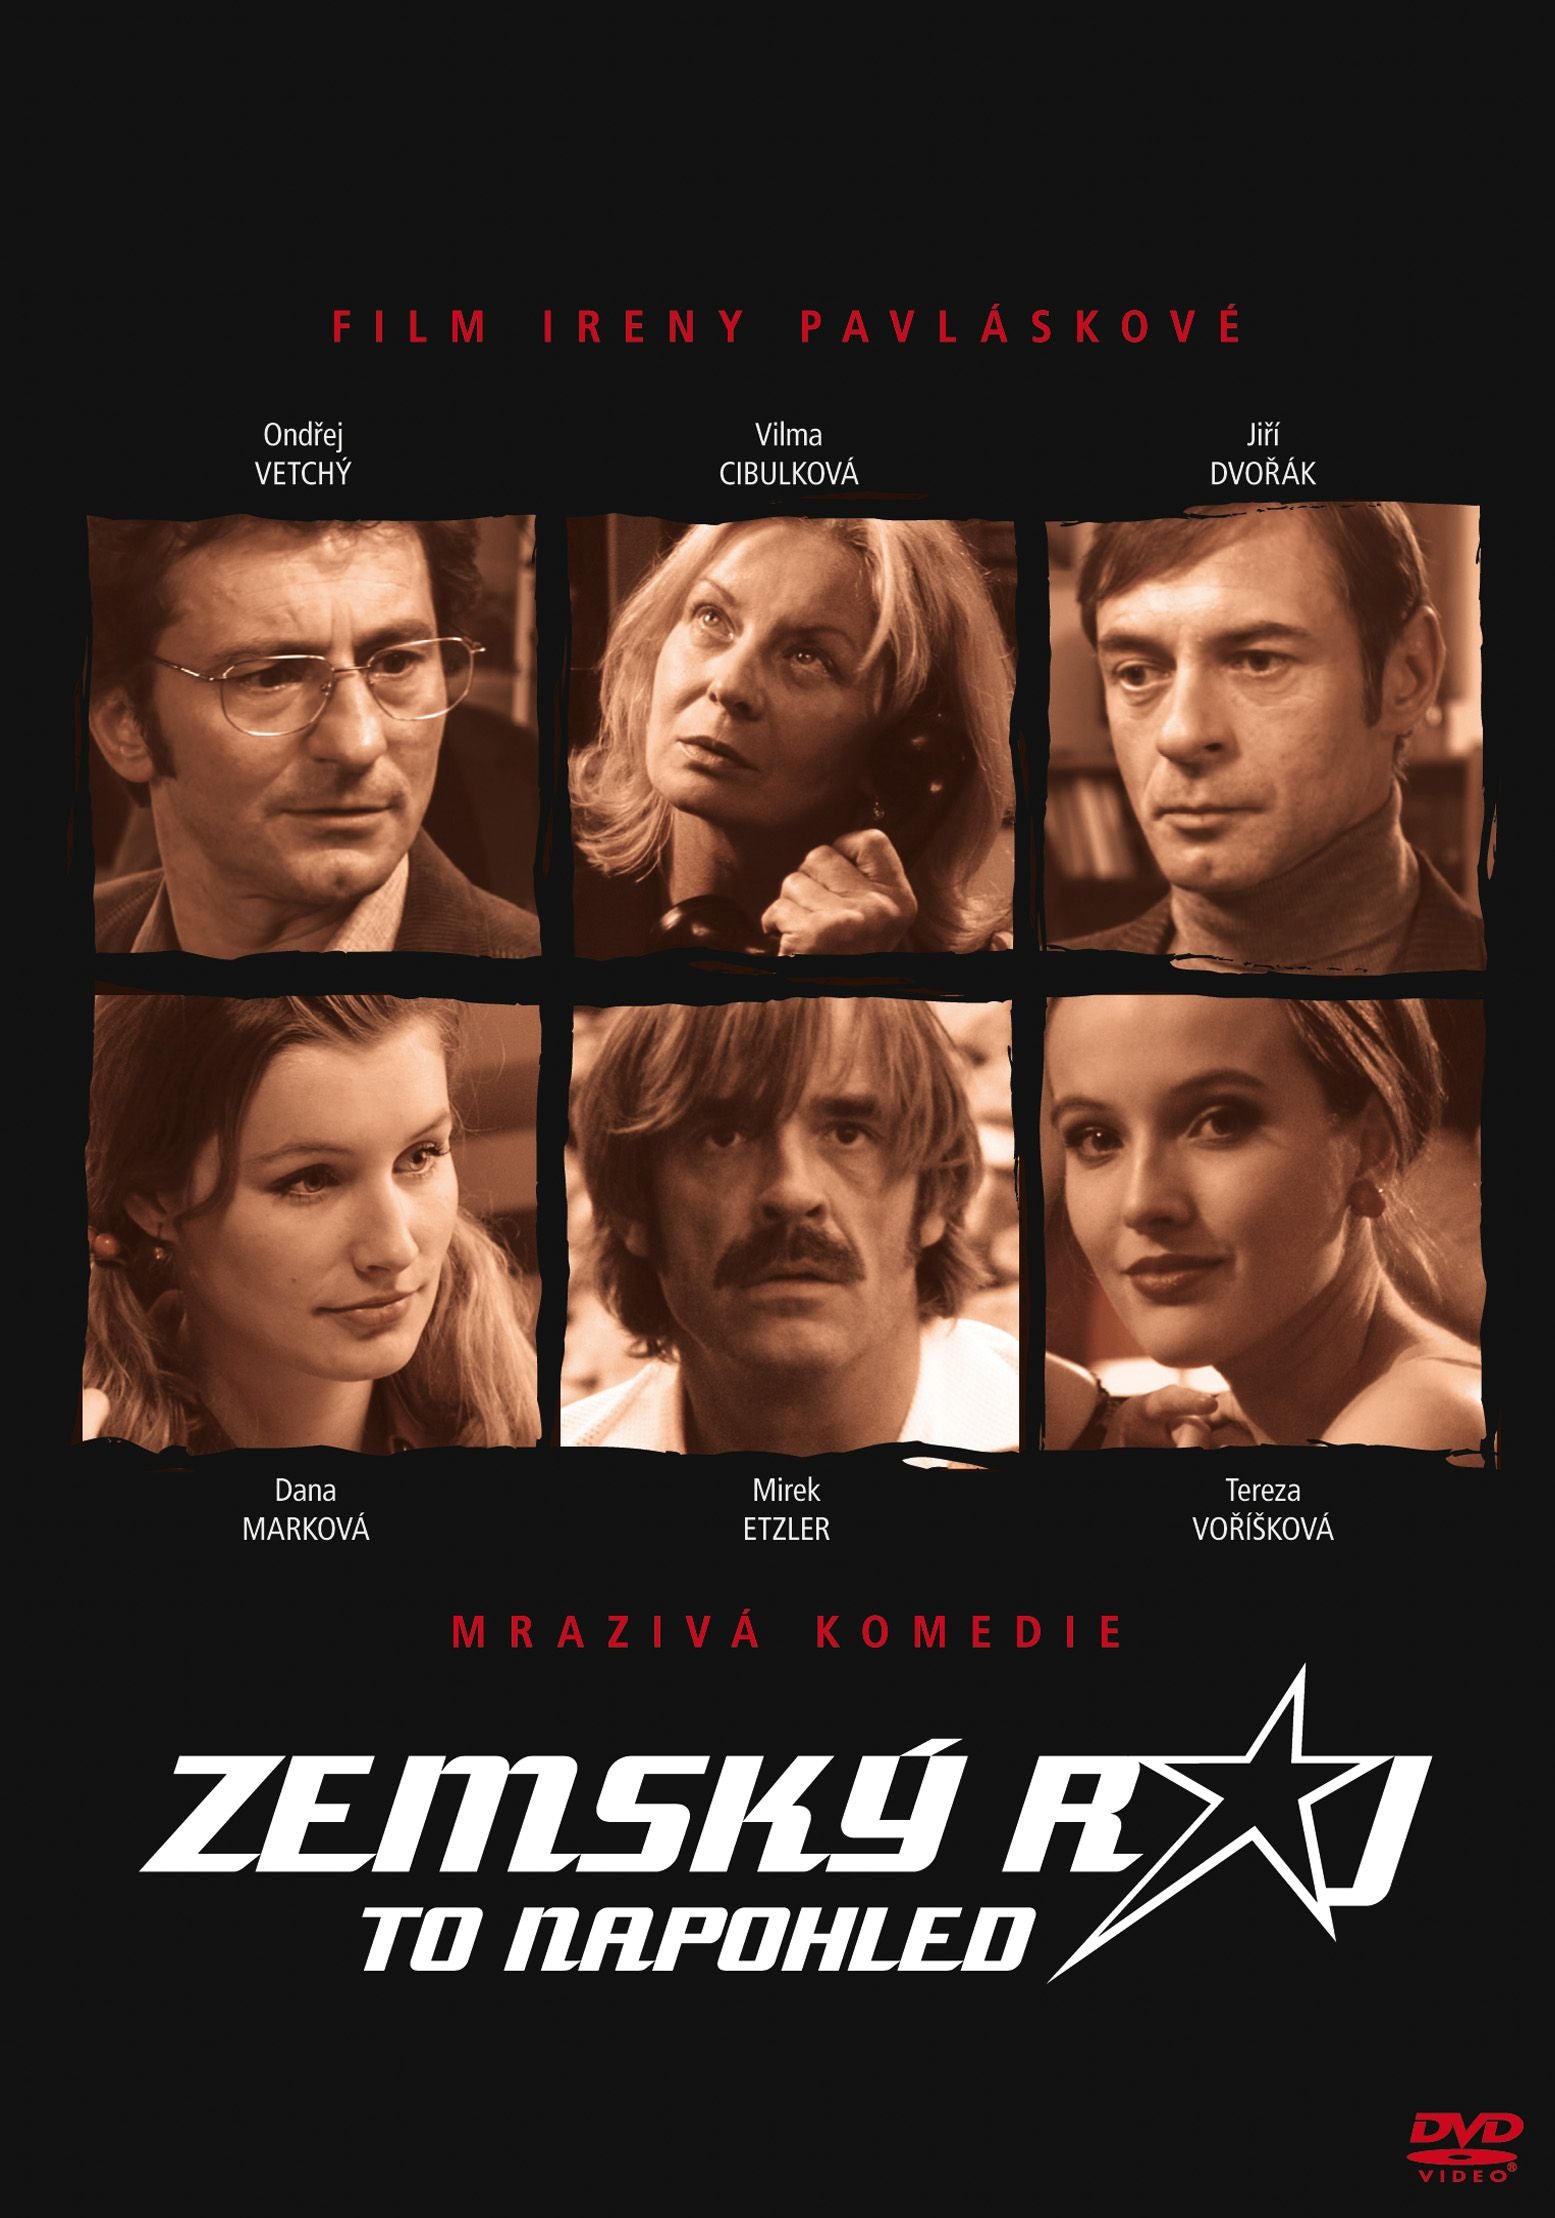 Paradise on Earth it is to See / Zemsky raj to napohled DVD